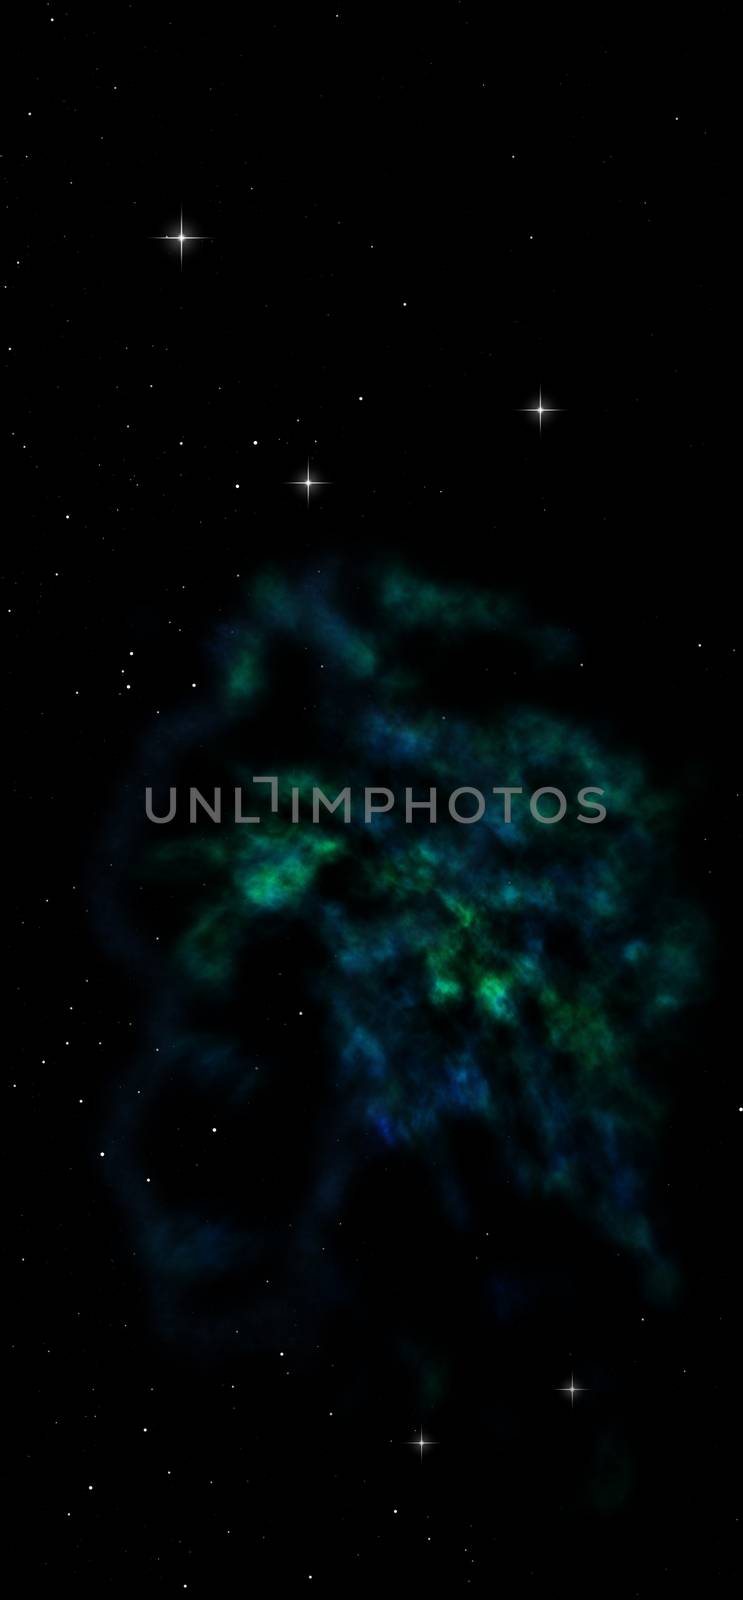 Far being shone nebula and star field against space. Elements of this image furnished by NASA . 3D rendering.